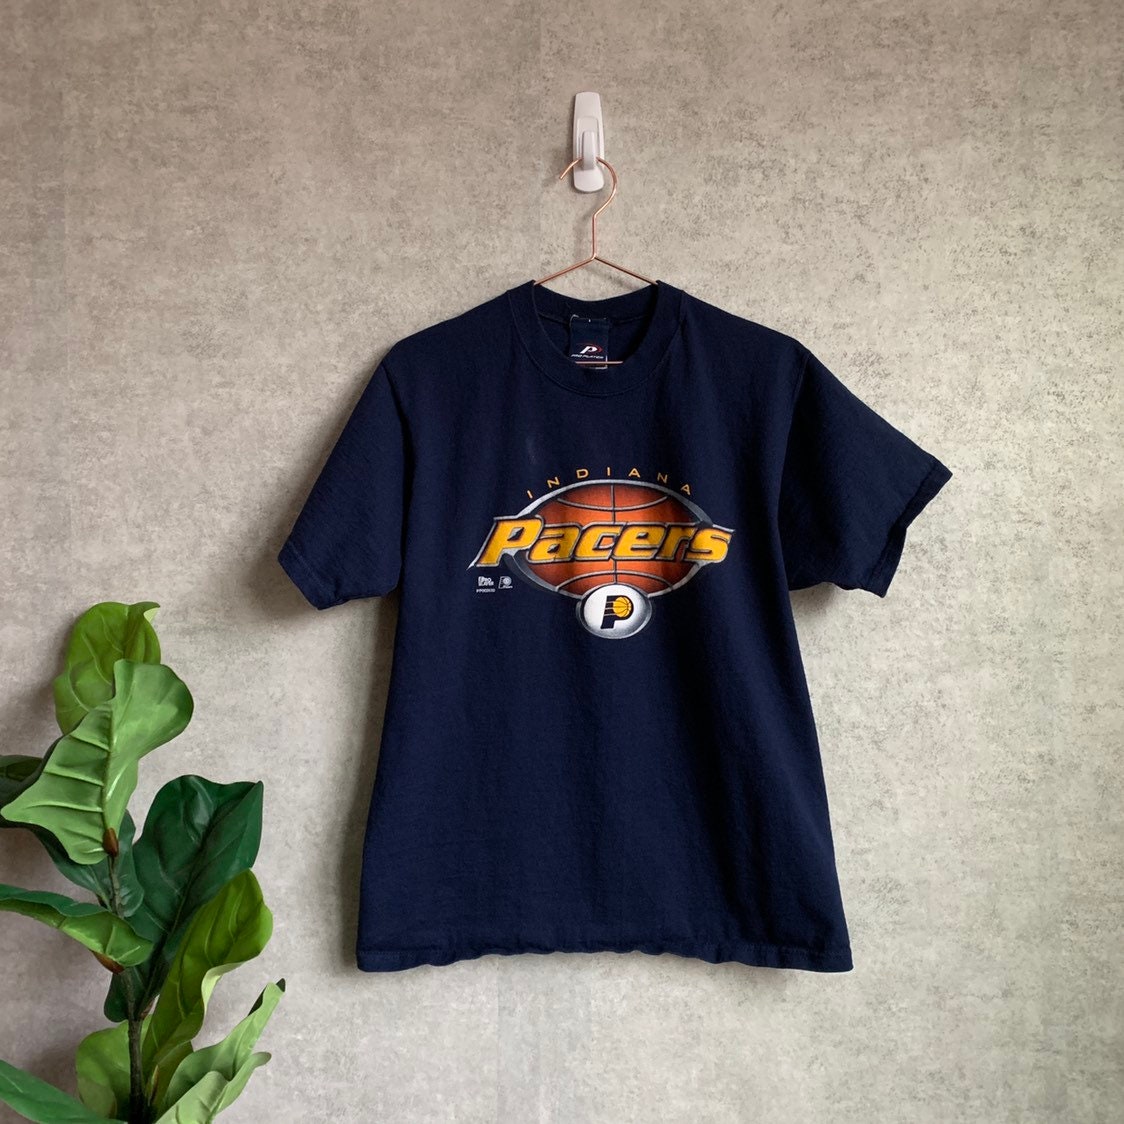 Vintage 1990s Indiana Pacers NBA Basketball Navy Blue T-Shirt